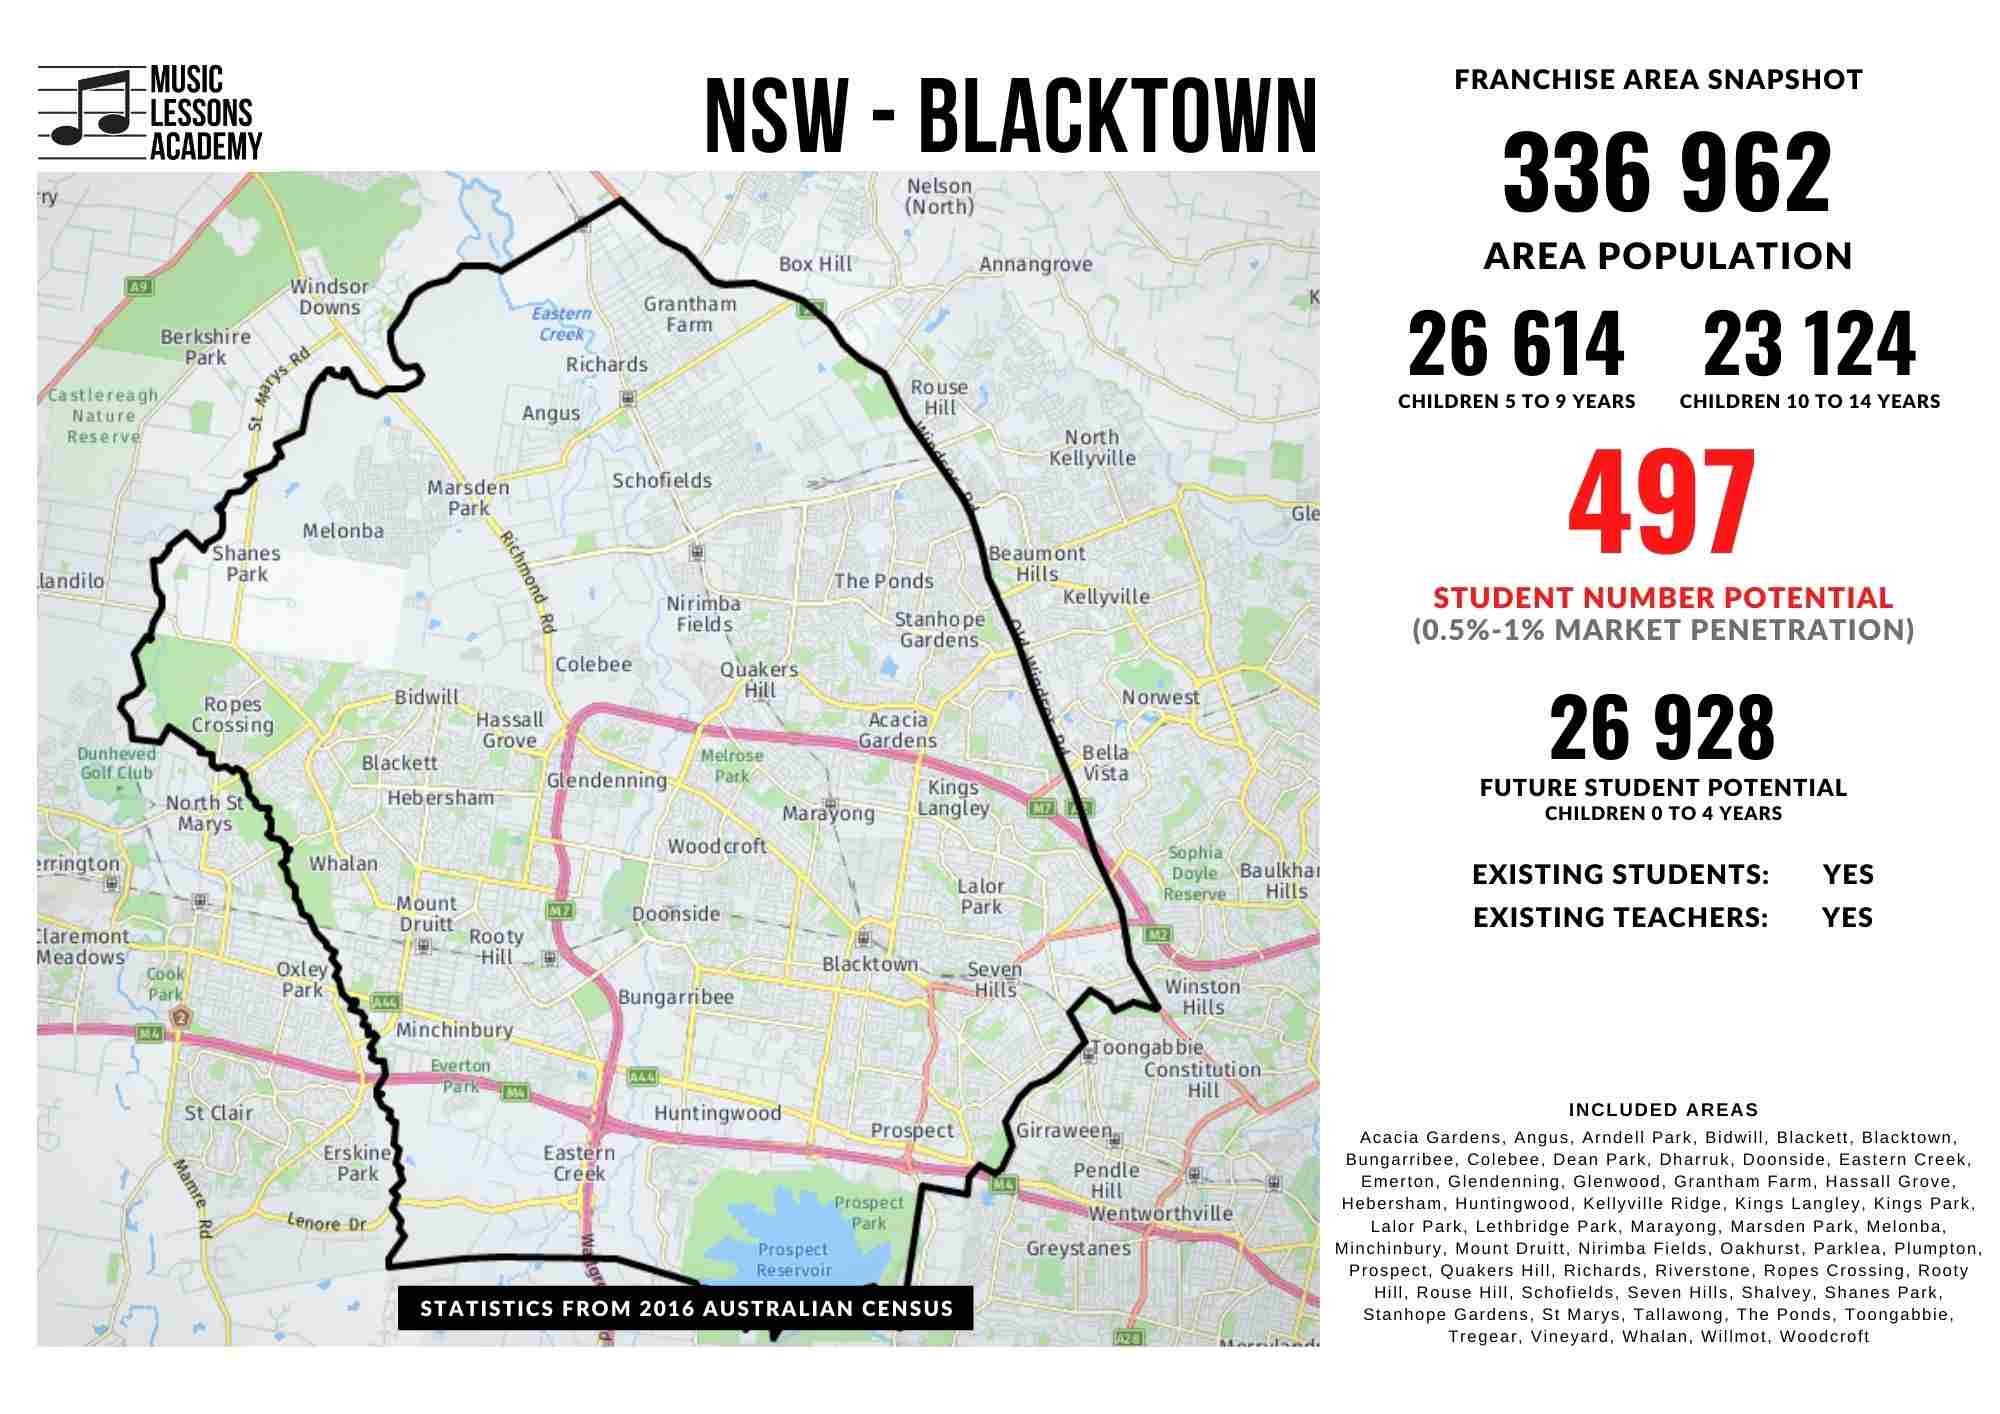 NSW Blacktown Franchise for sale